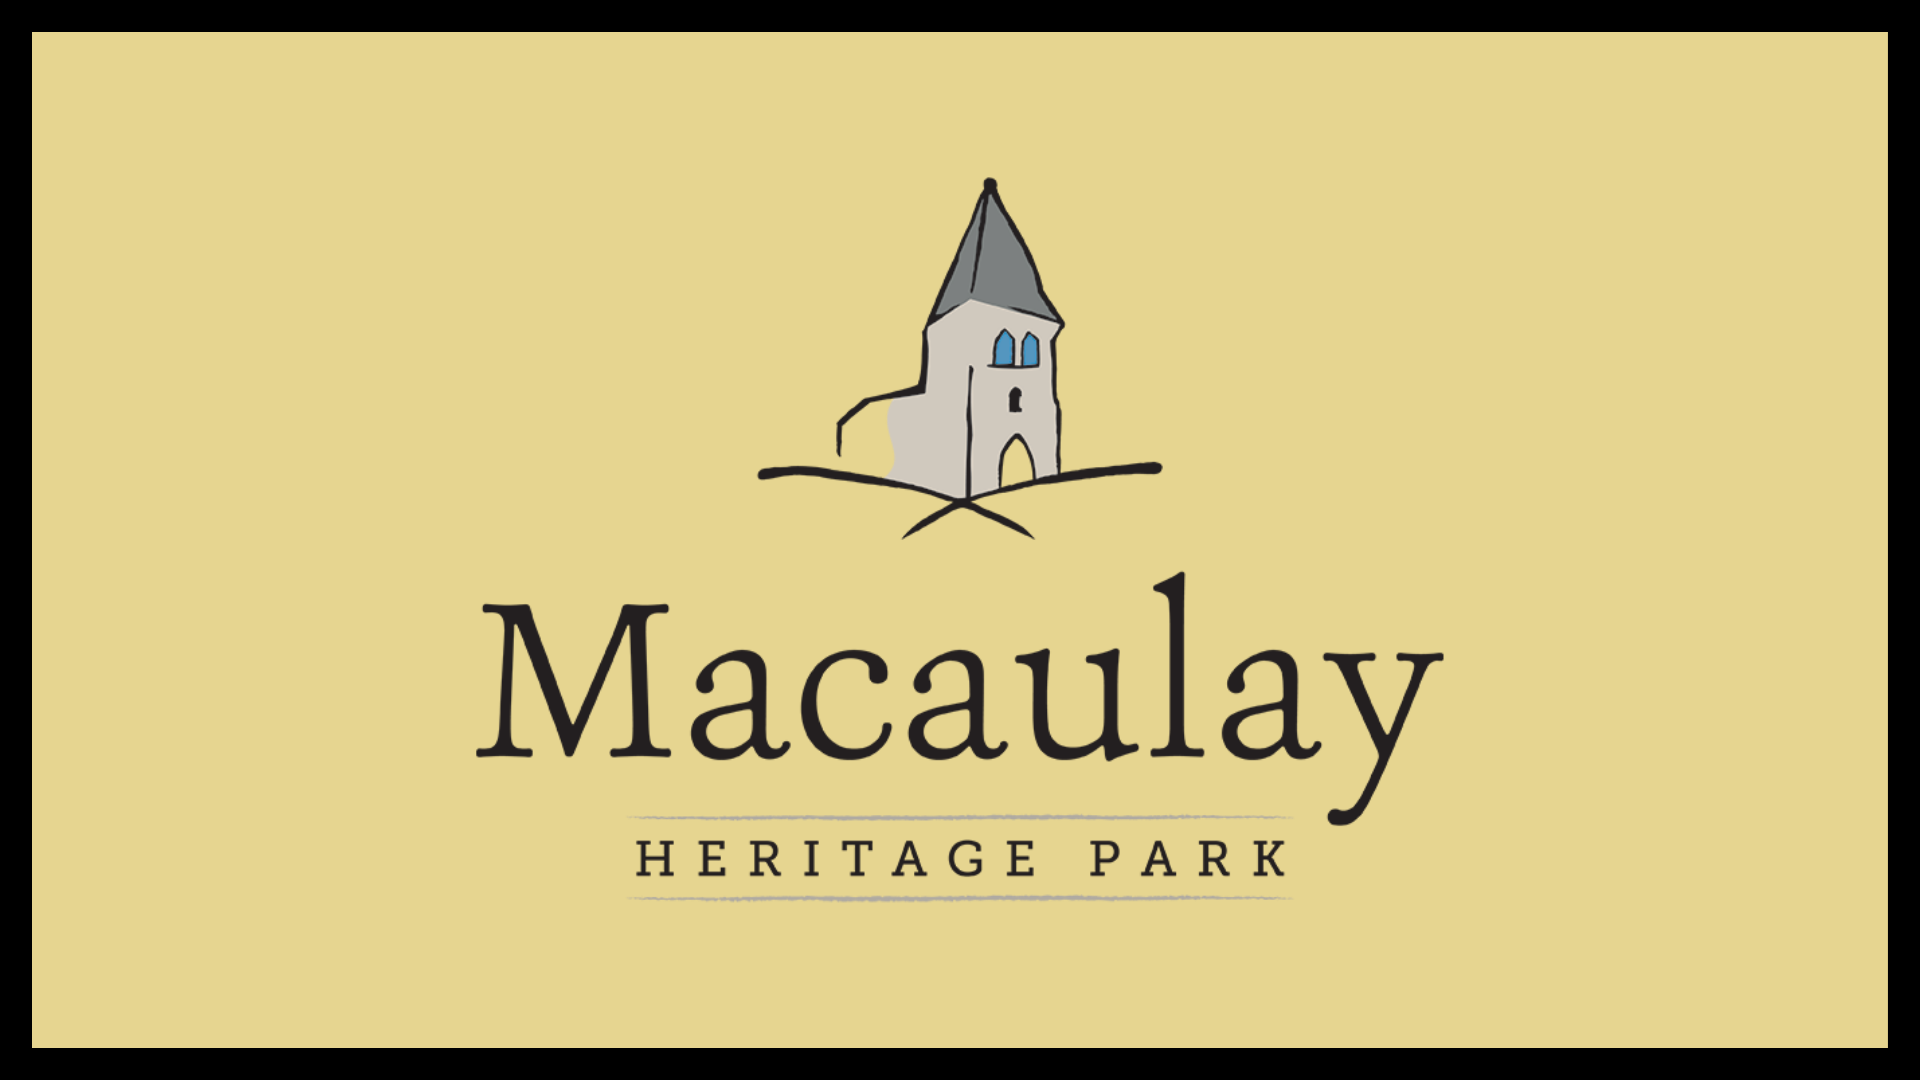 Macaulay Heritage Park graphic with illustrated church